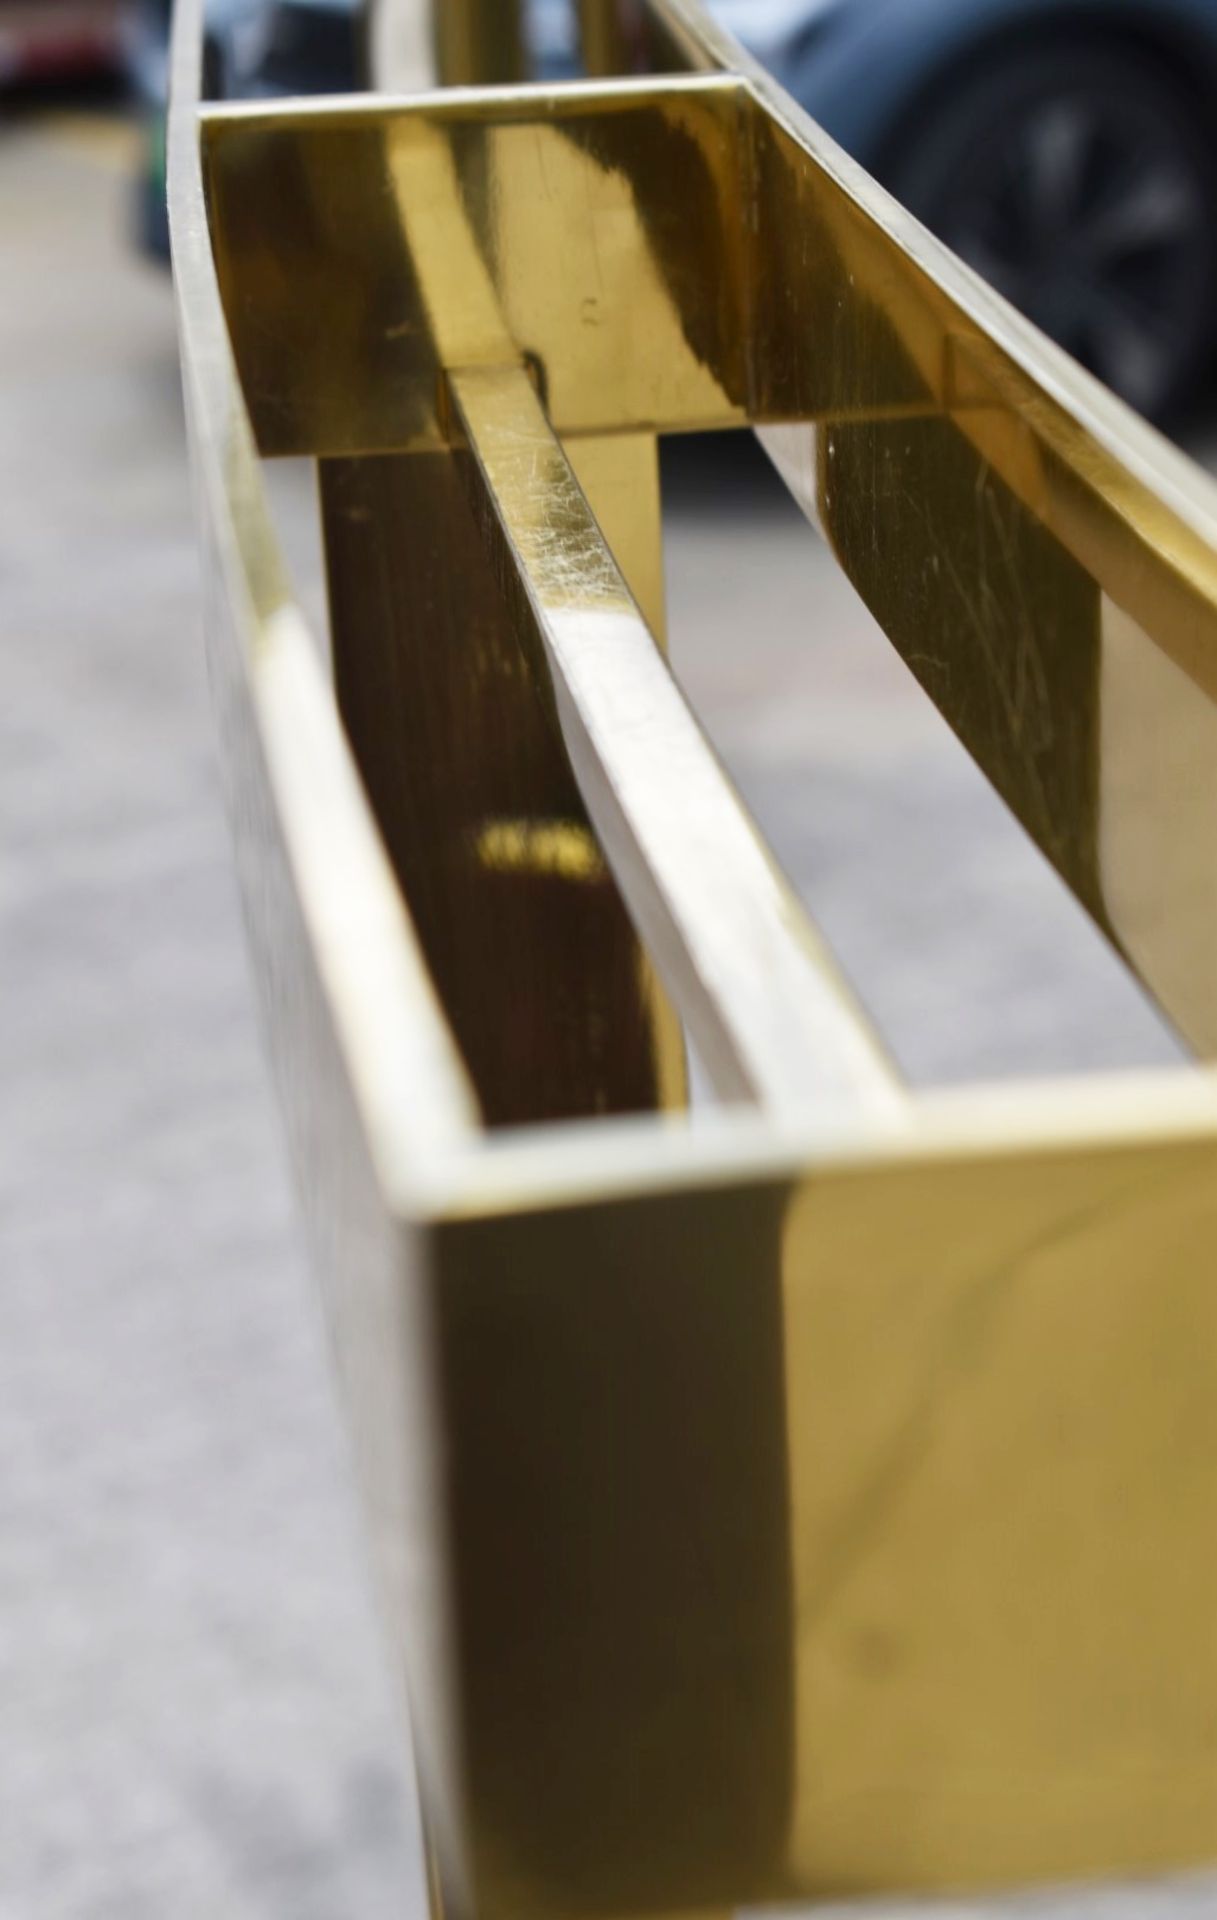 1 x Opulent Garment Rail from a Versace Retail Display Featuring a Marble Base and Curved Design - Image 8 of 12